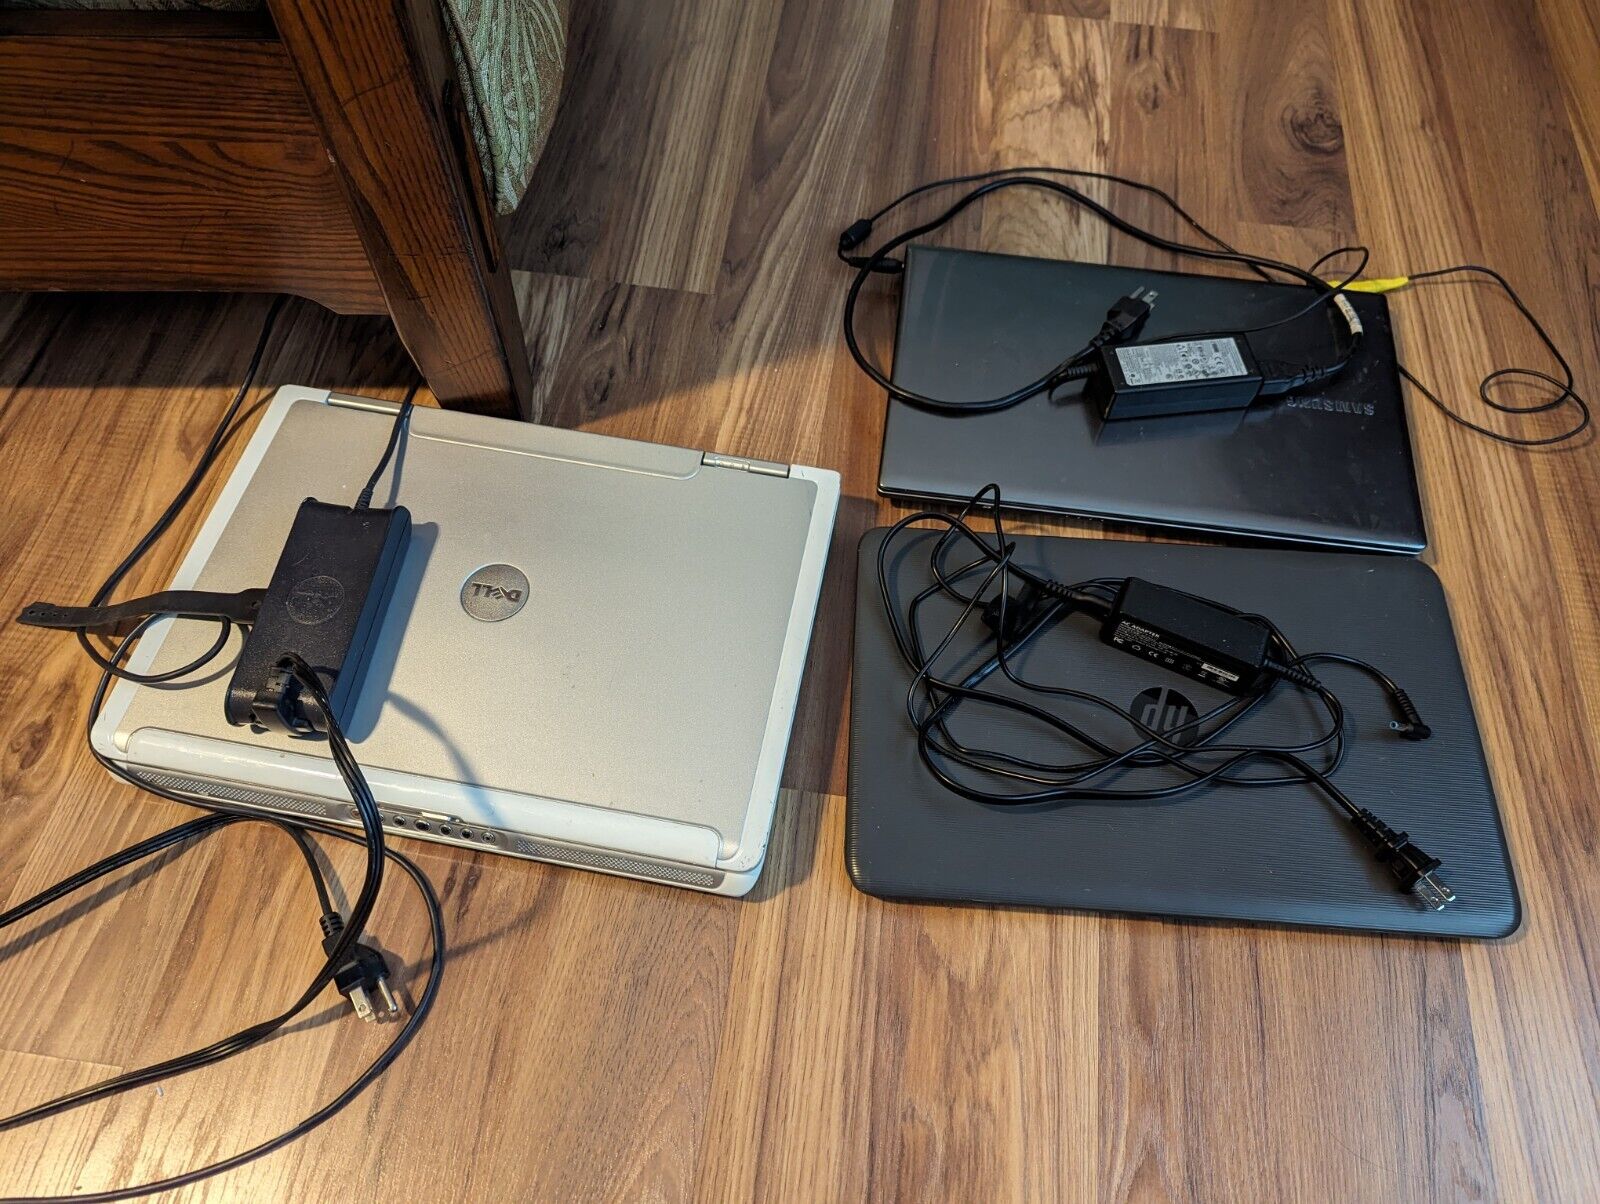 Lot of 3 Laptops - Dell, HP, Samsung - All tested and working w/chargers. NO OS